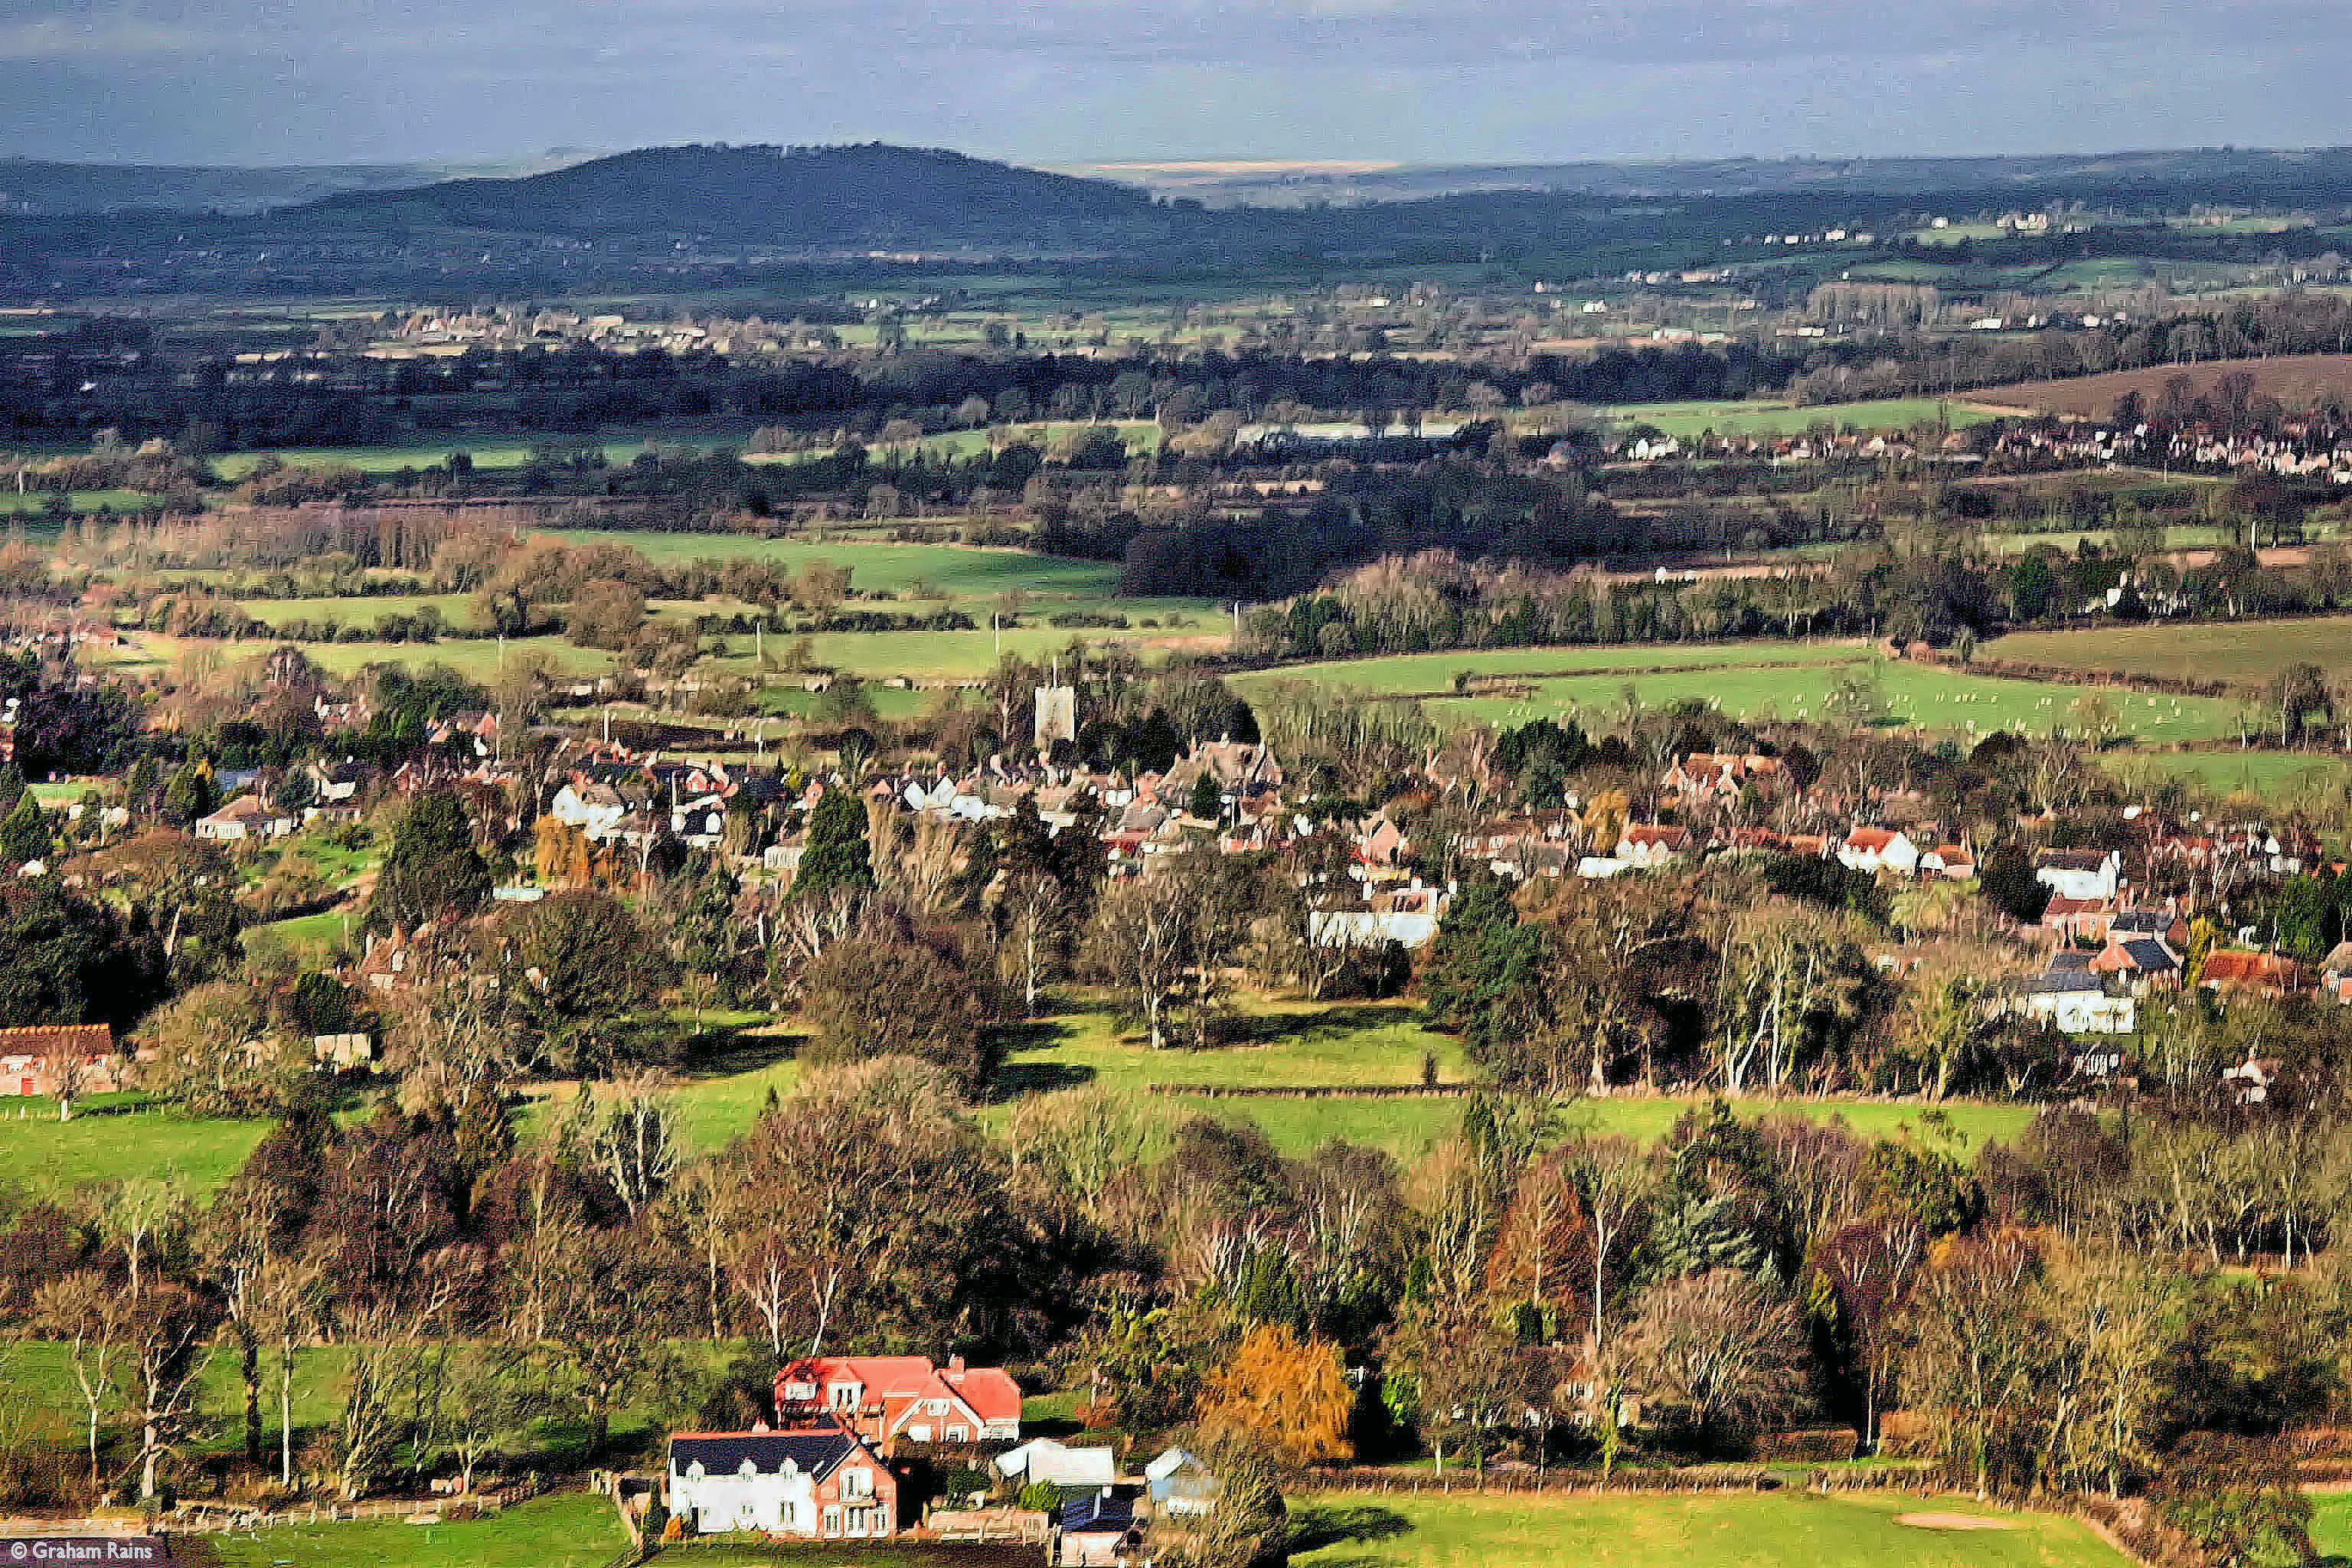 Looking over Shillingstone